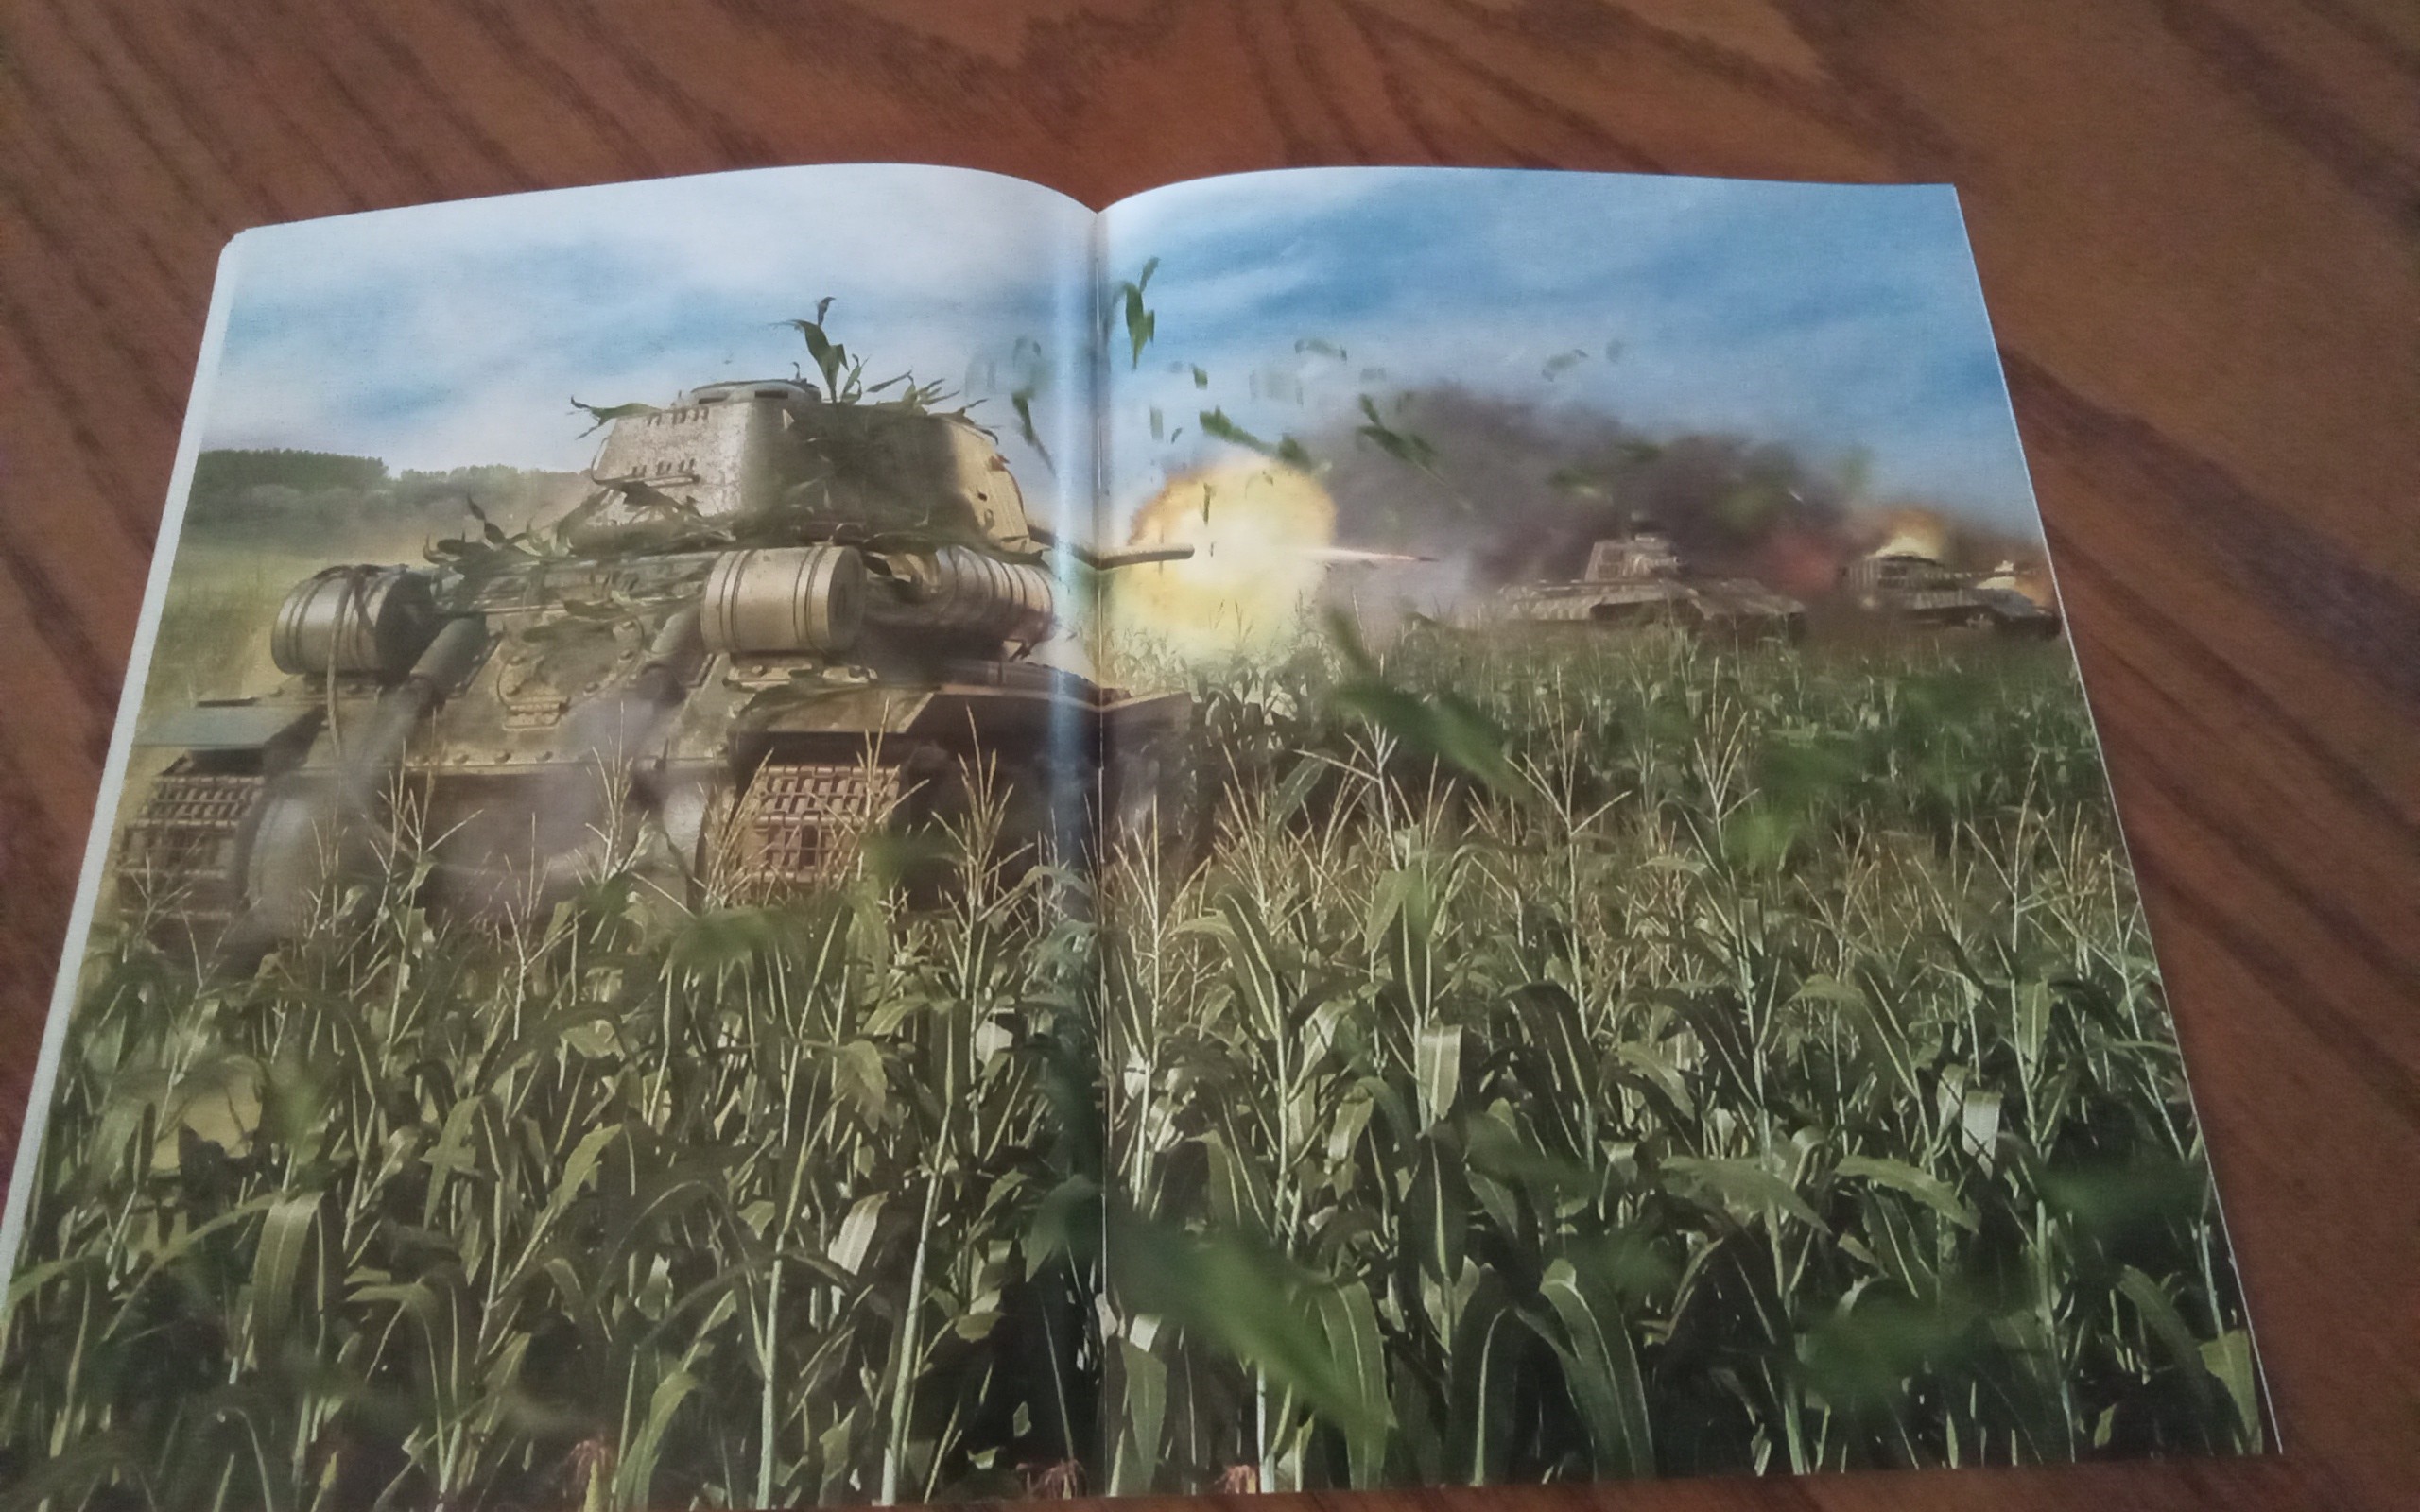 tanks playing catch in a corn field.